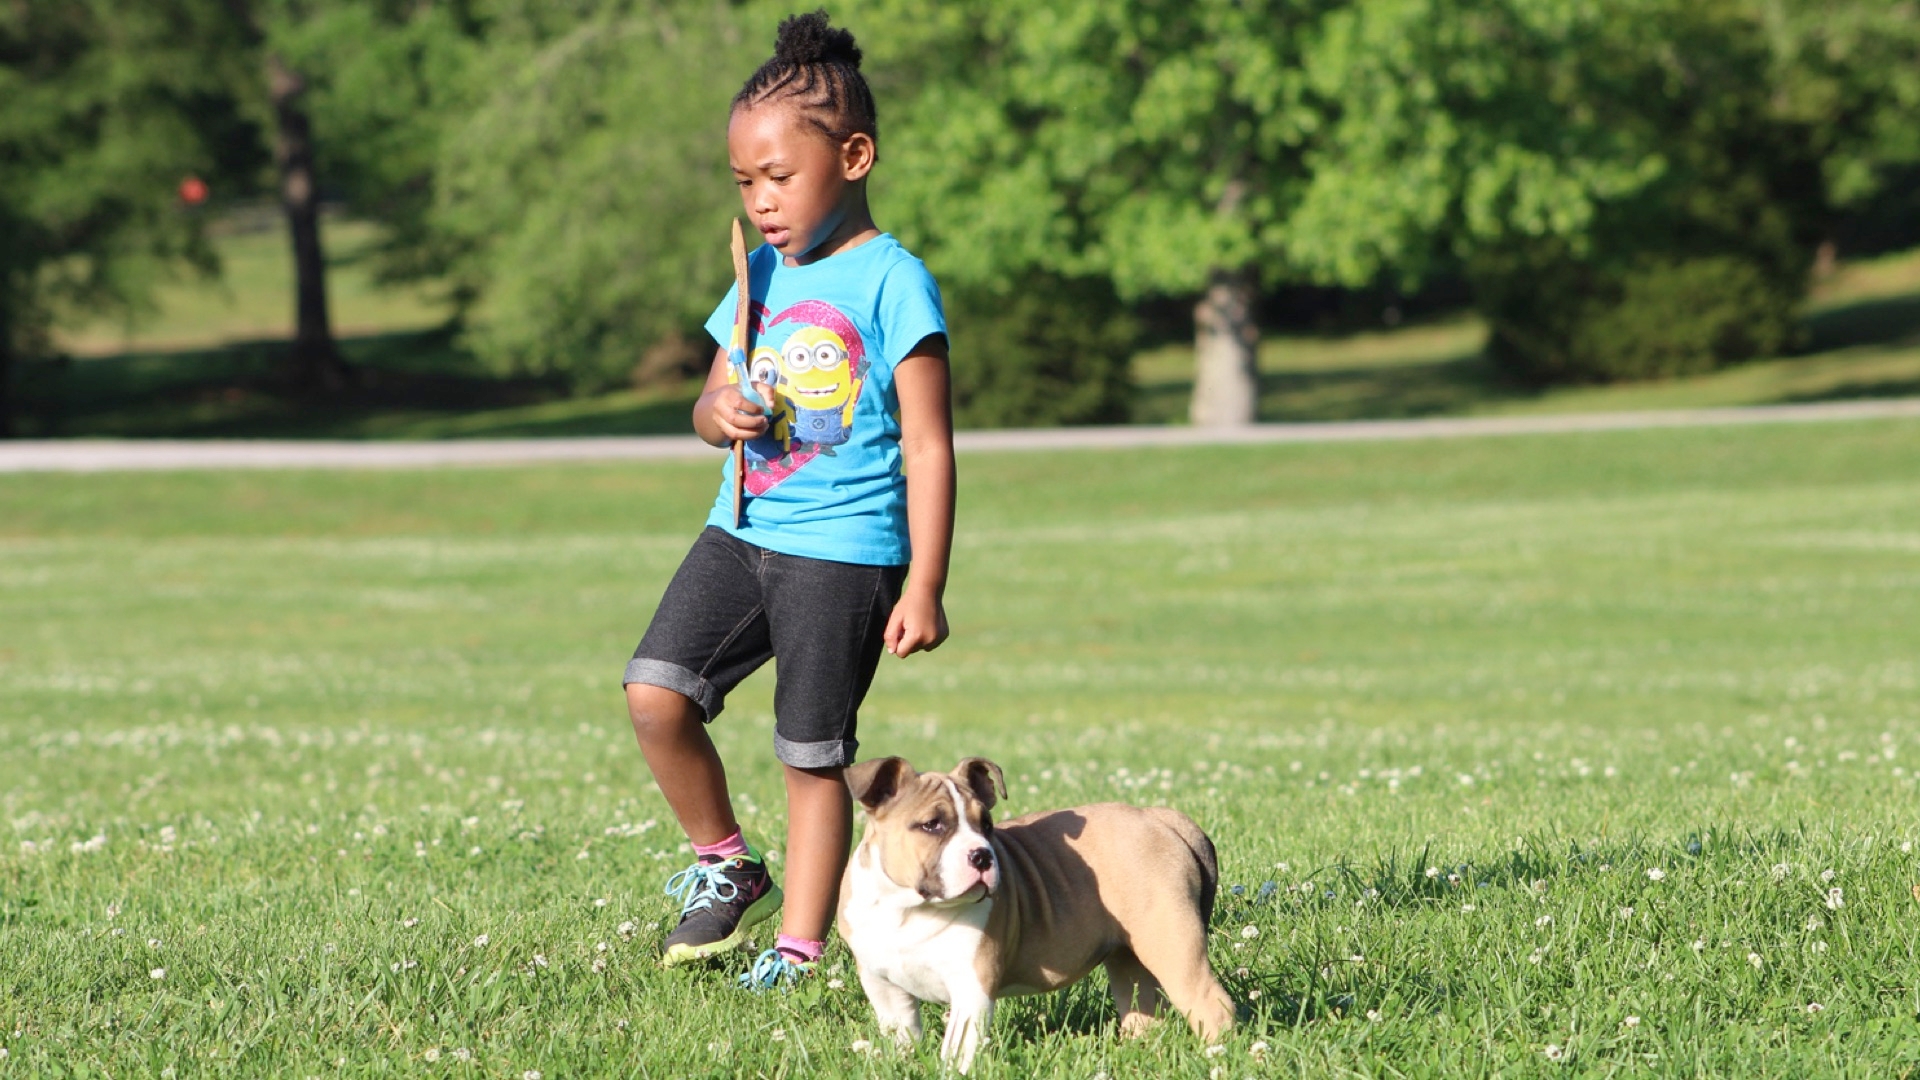 Children And Dogs, Important Information For Parents